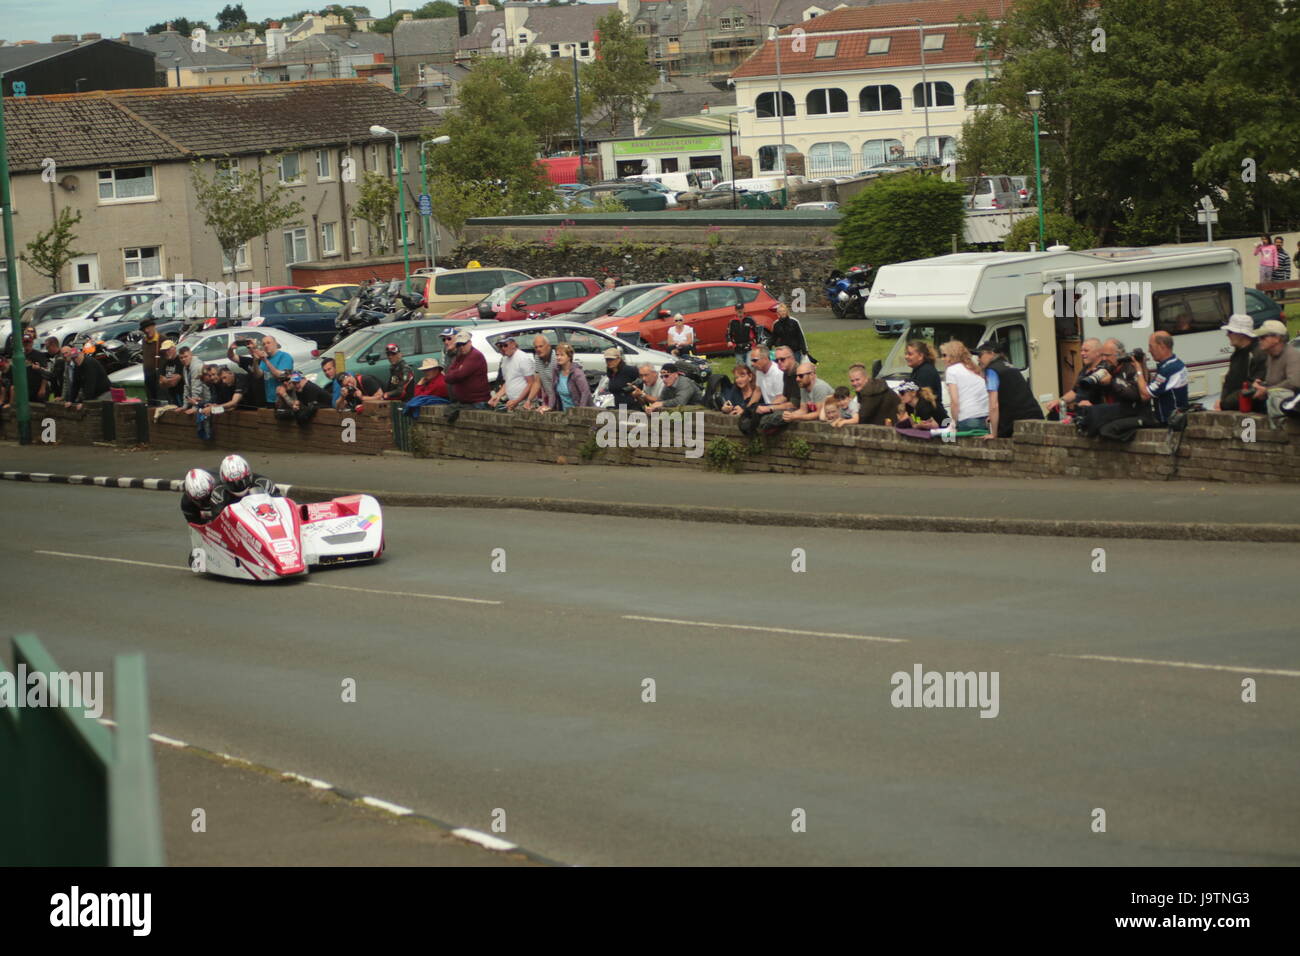 Isle of Man TT Races, Qualifying Practice Race, Saturday 3 June 2017.Sidecar qualifying session. Number 8 Karl Bennett and  Maxime Vasseur on their 600cc Suzuki sidecar of the Bennett Racing  team  Credit: Eclectic Art and Photography/Alamy Live News. Stock Photo